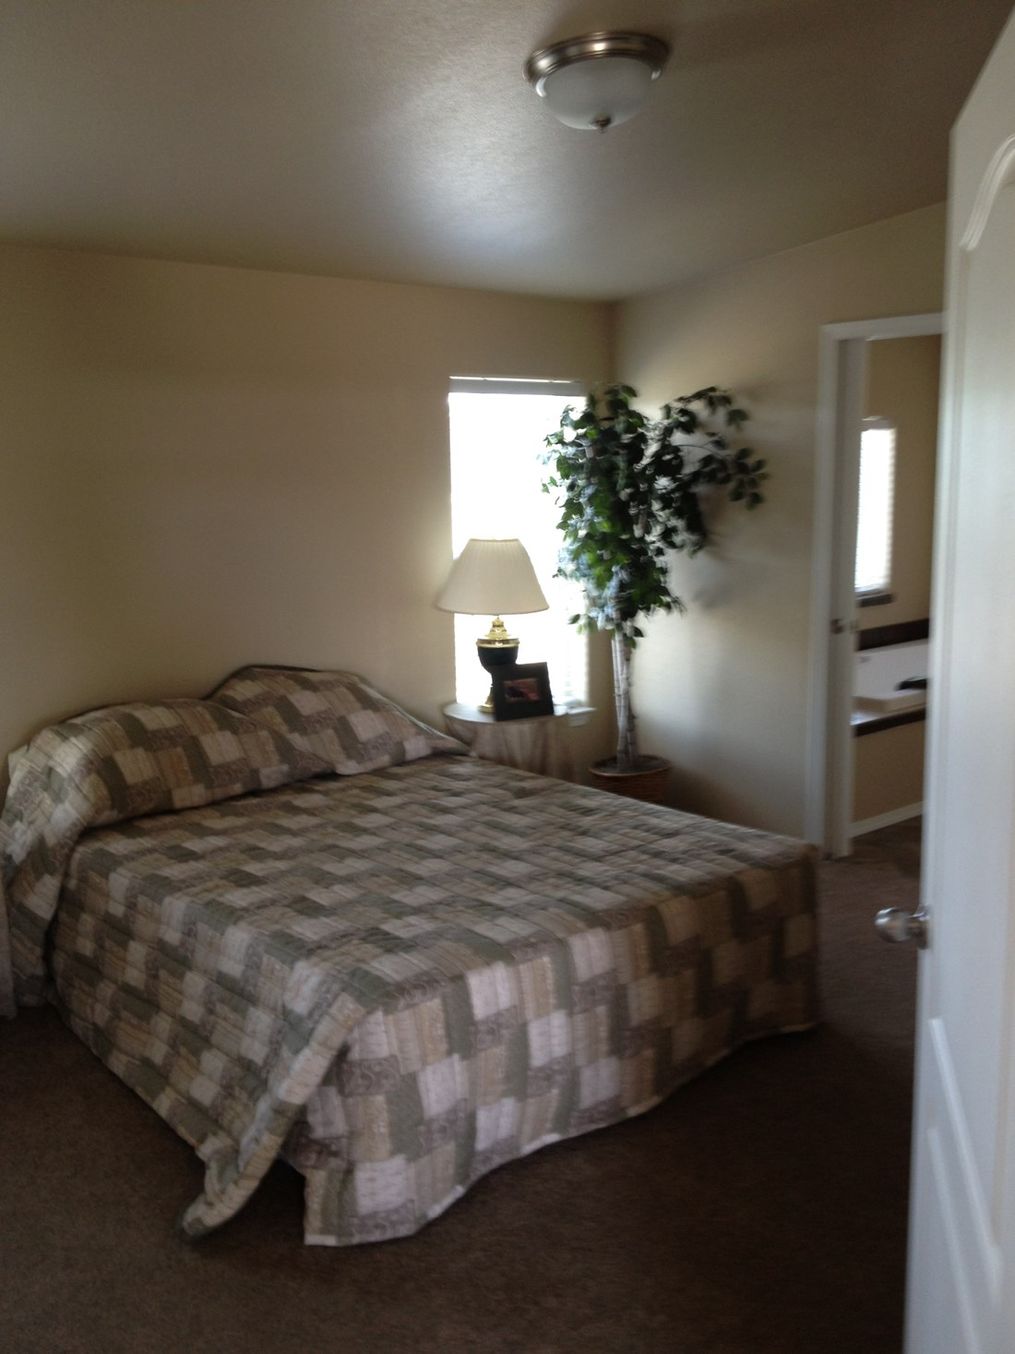 The 2848 MARLETTE SPECIAL Primary Bedroom. This Manufactured Mobile Home features 3 bedrooms and 2 baths.